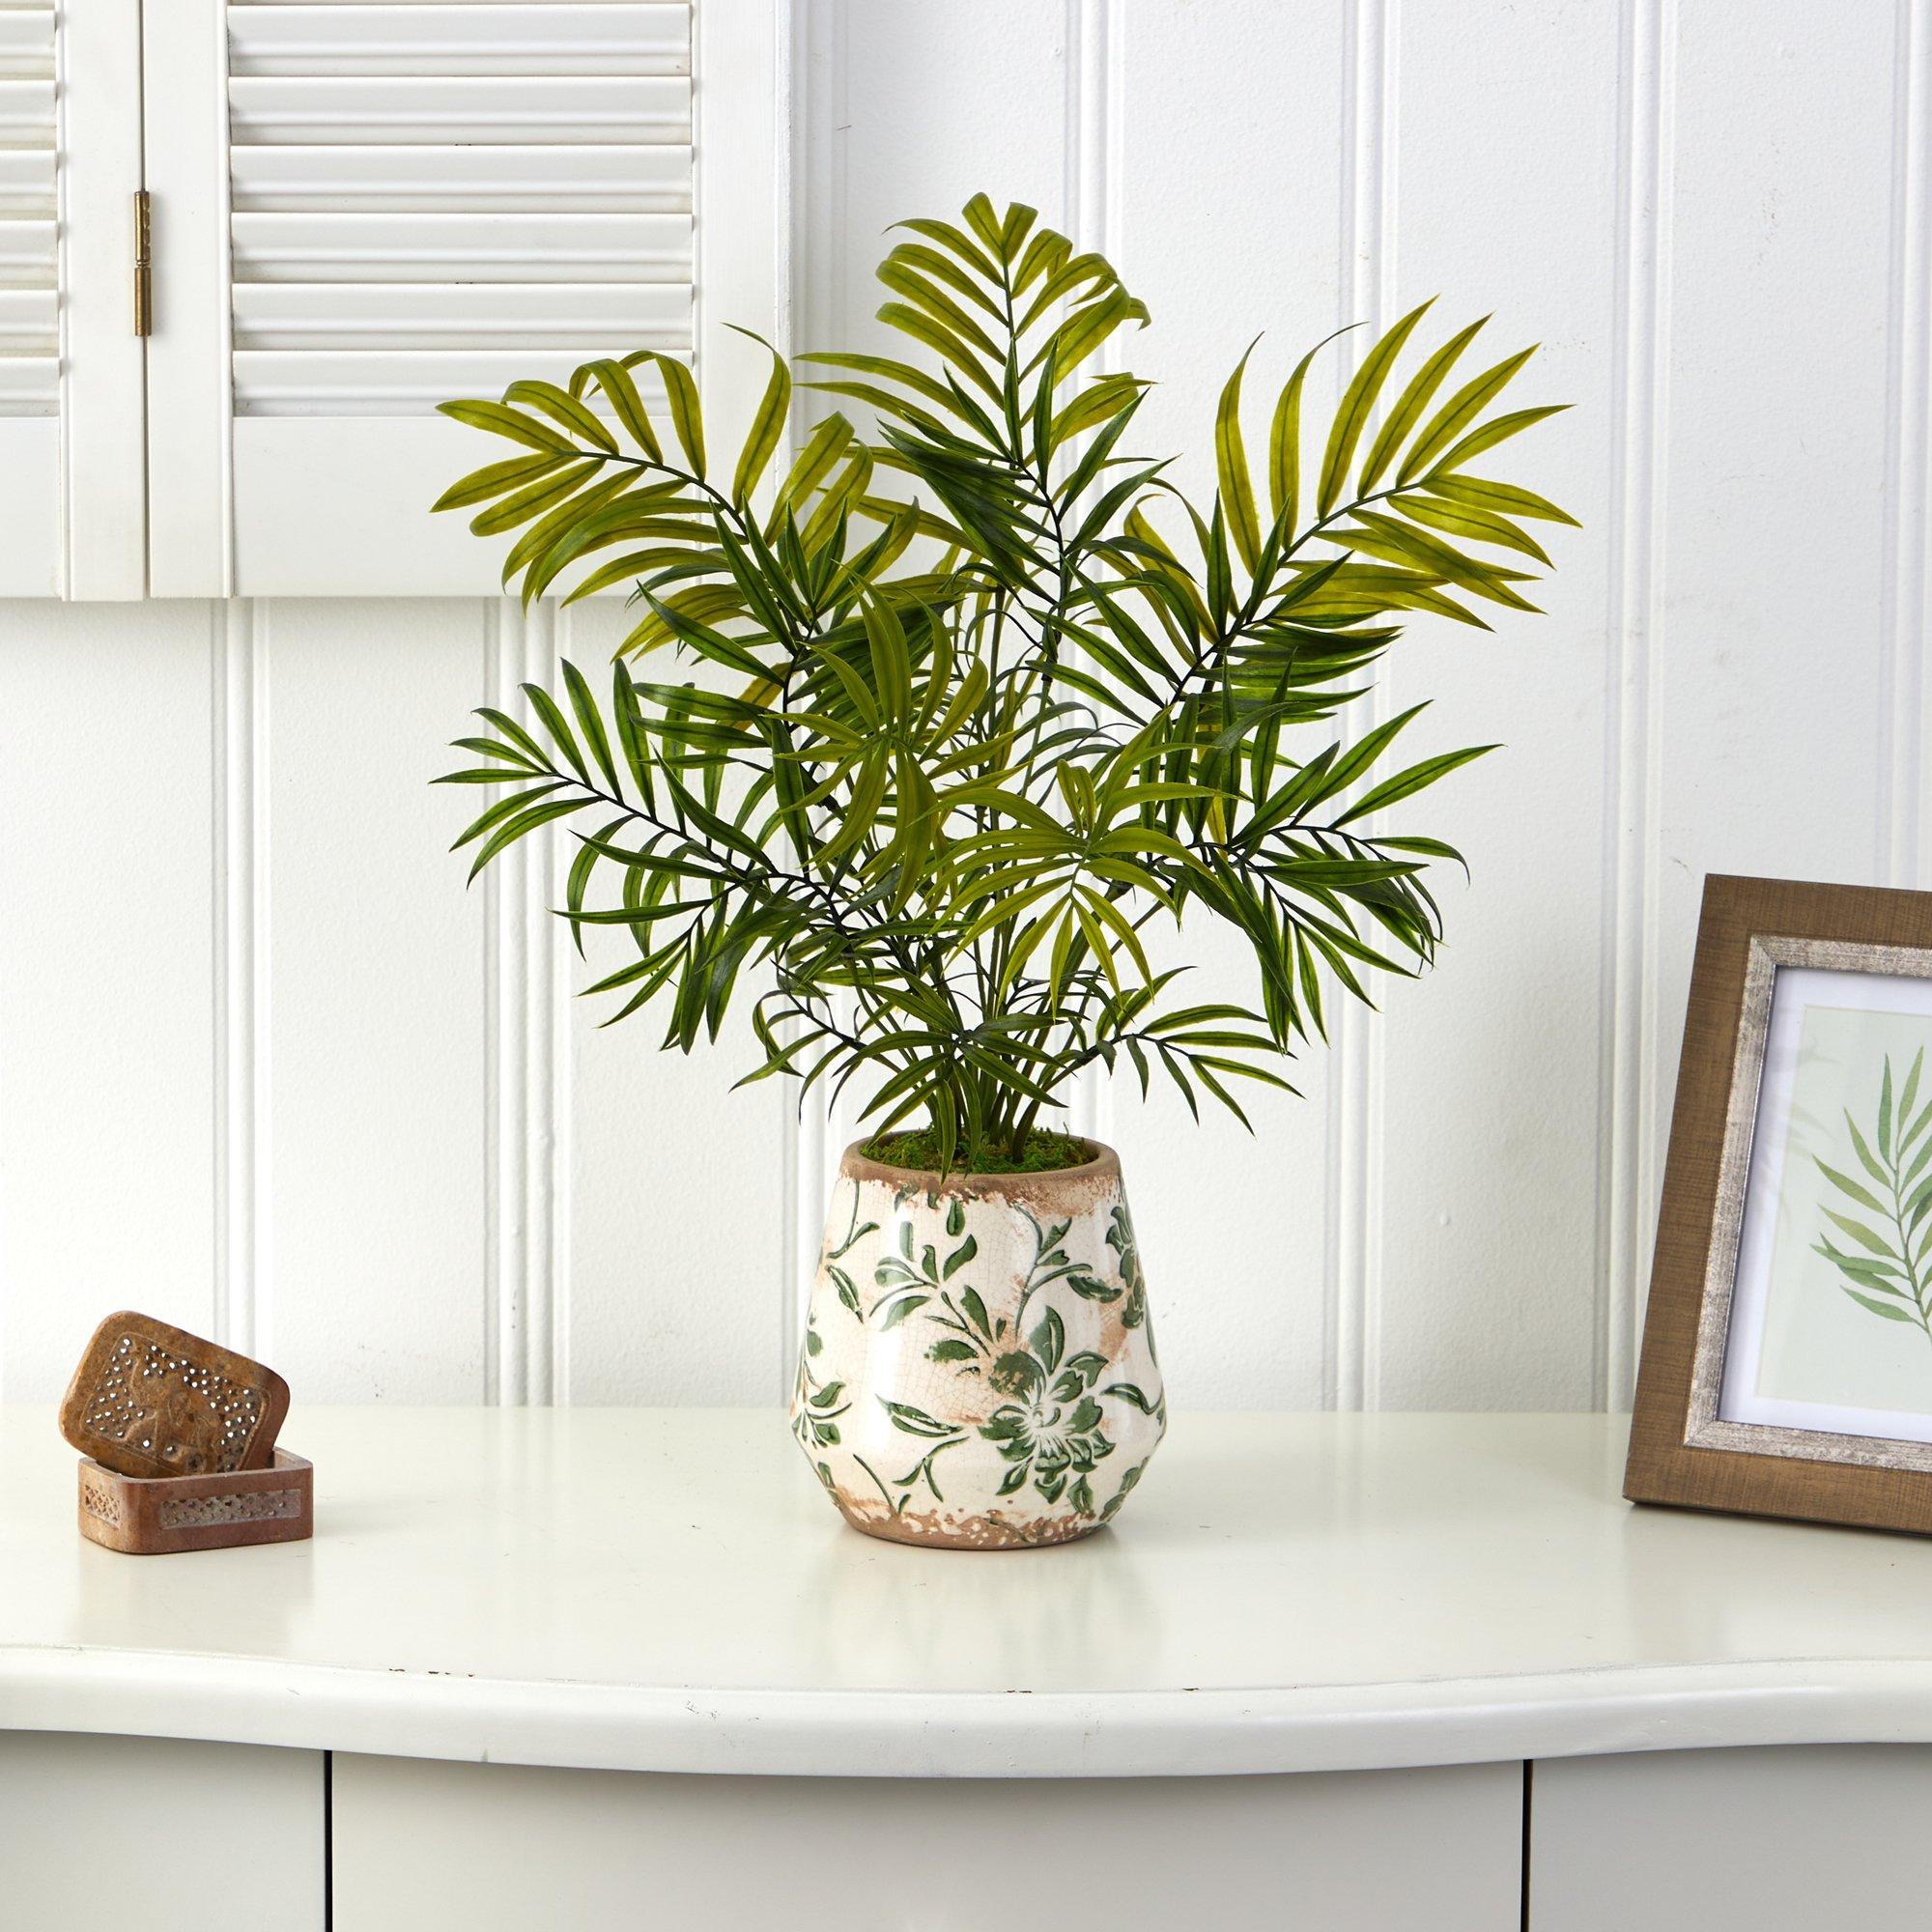 Artificial Arrangement - 18” Mini Areca Palm  in Floral Vase by Nearly Natural